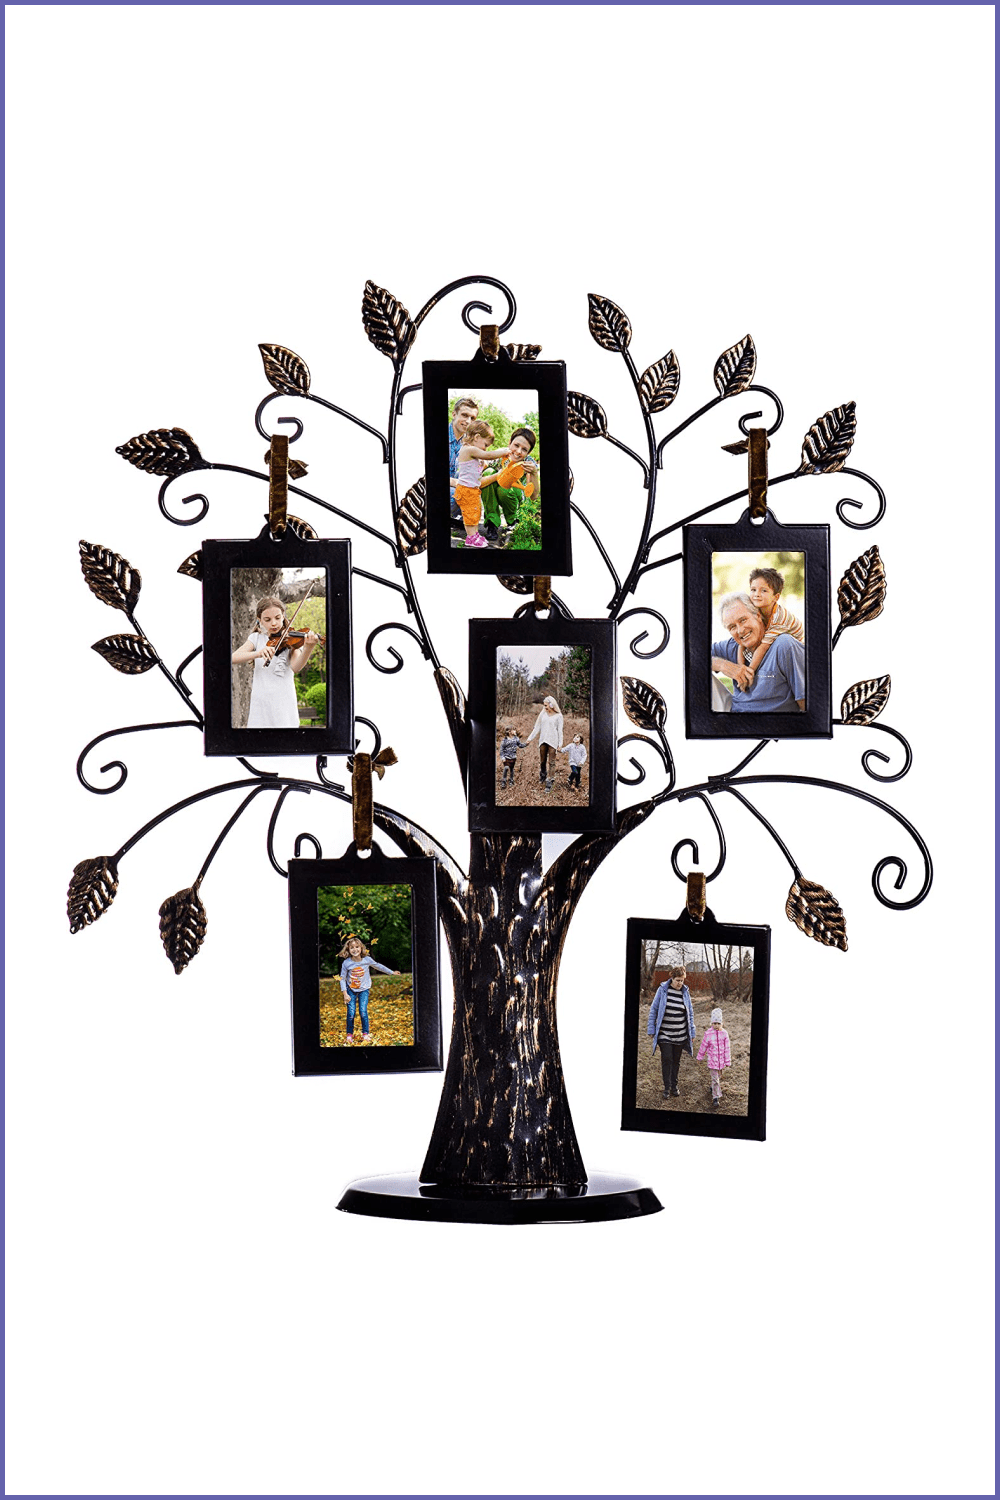 Klikel Family Tree Picture Frame Stand with 6 Hanging Photo Picture Frames.